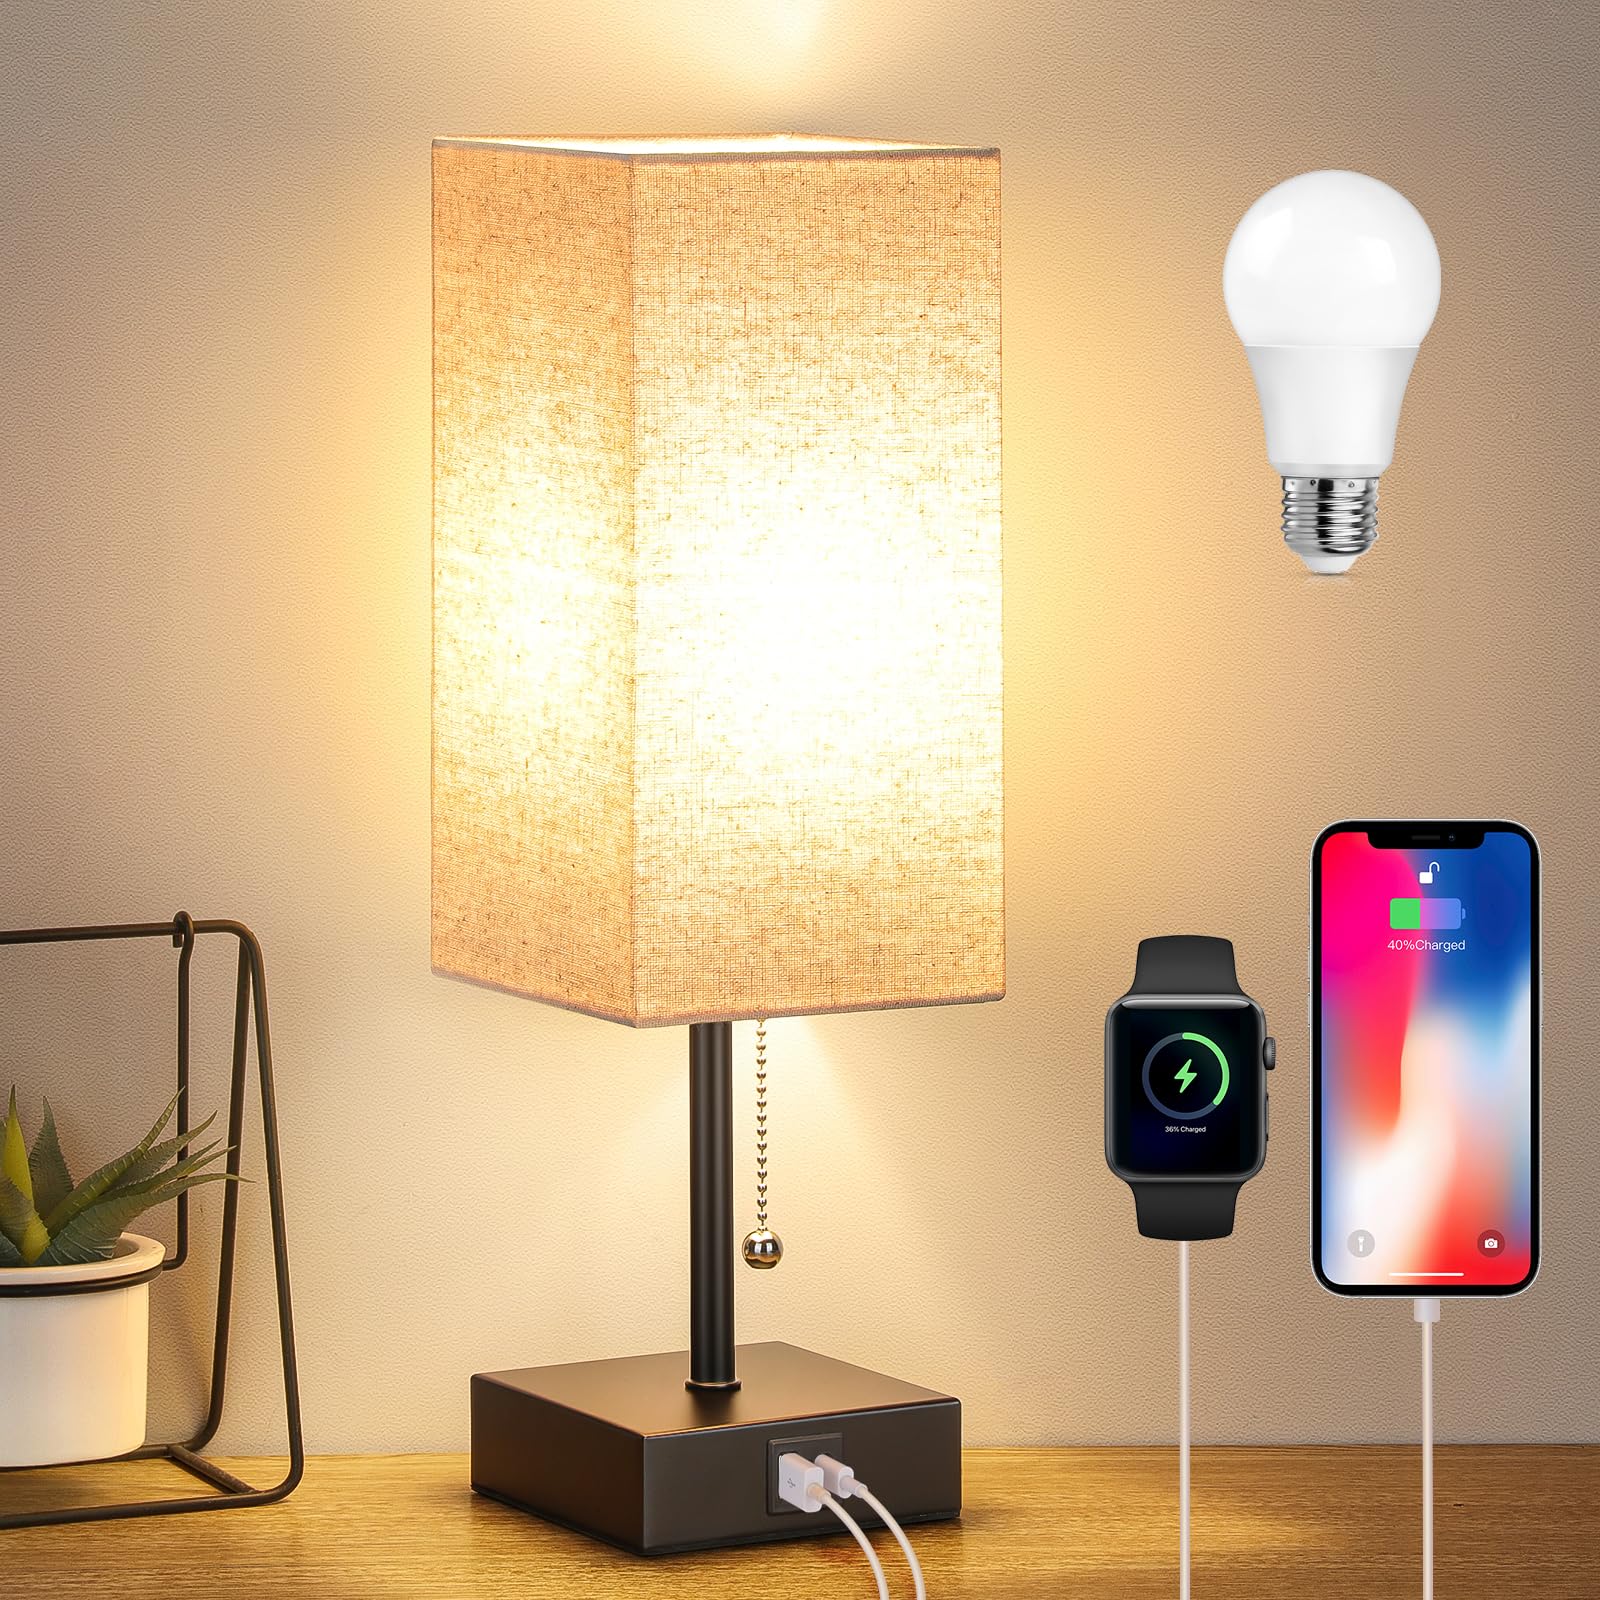 Bedside Table Lamp, Pull Chain Table Lamp with USB C+A Charging Ports $13.51